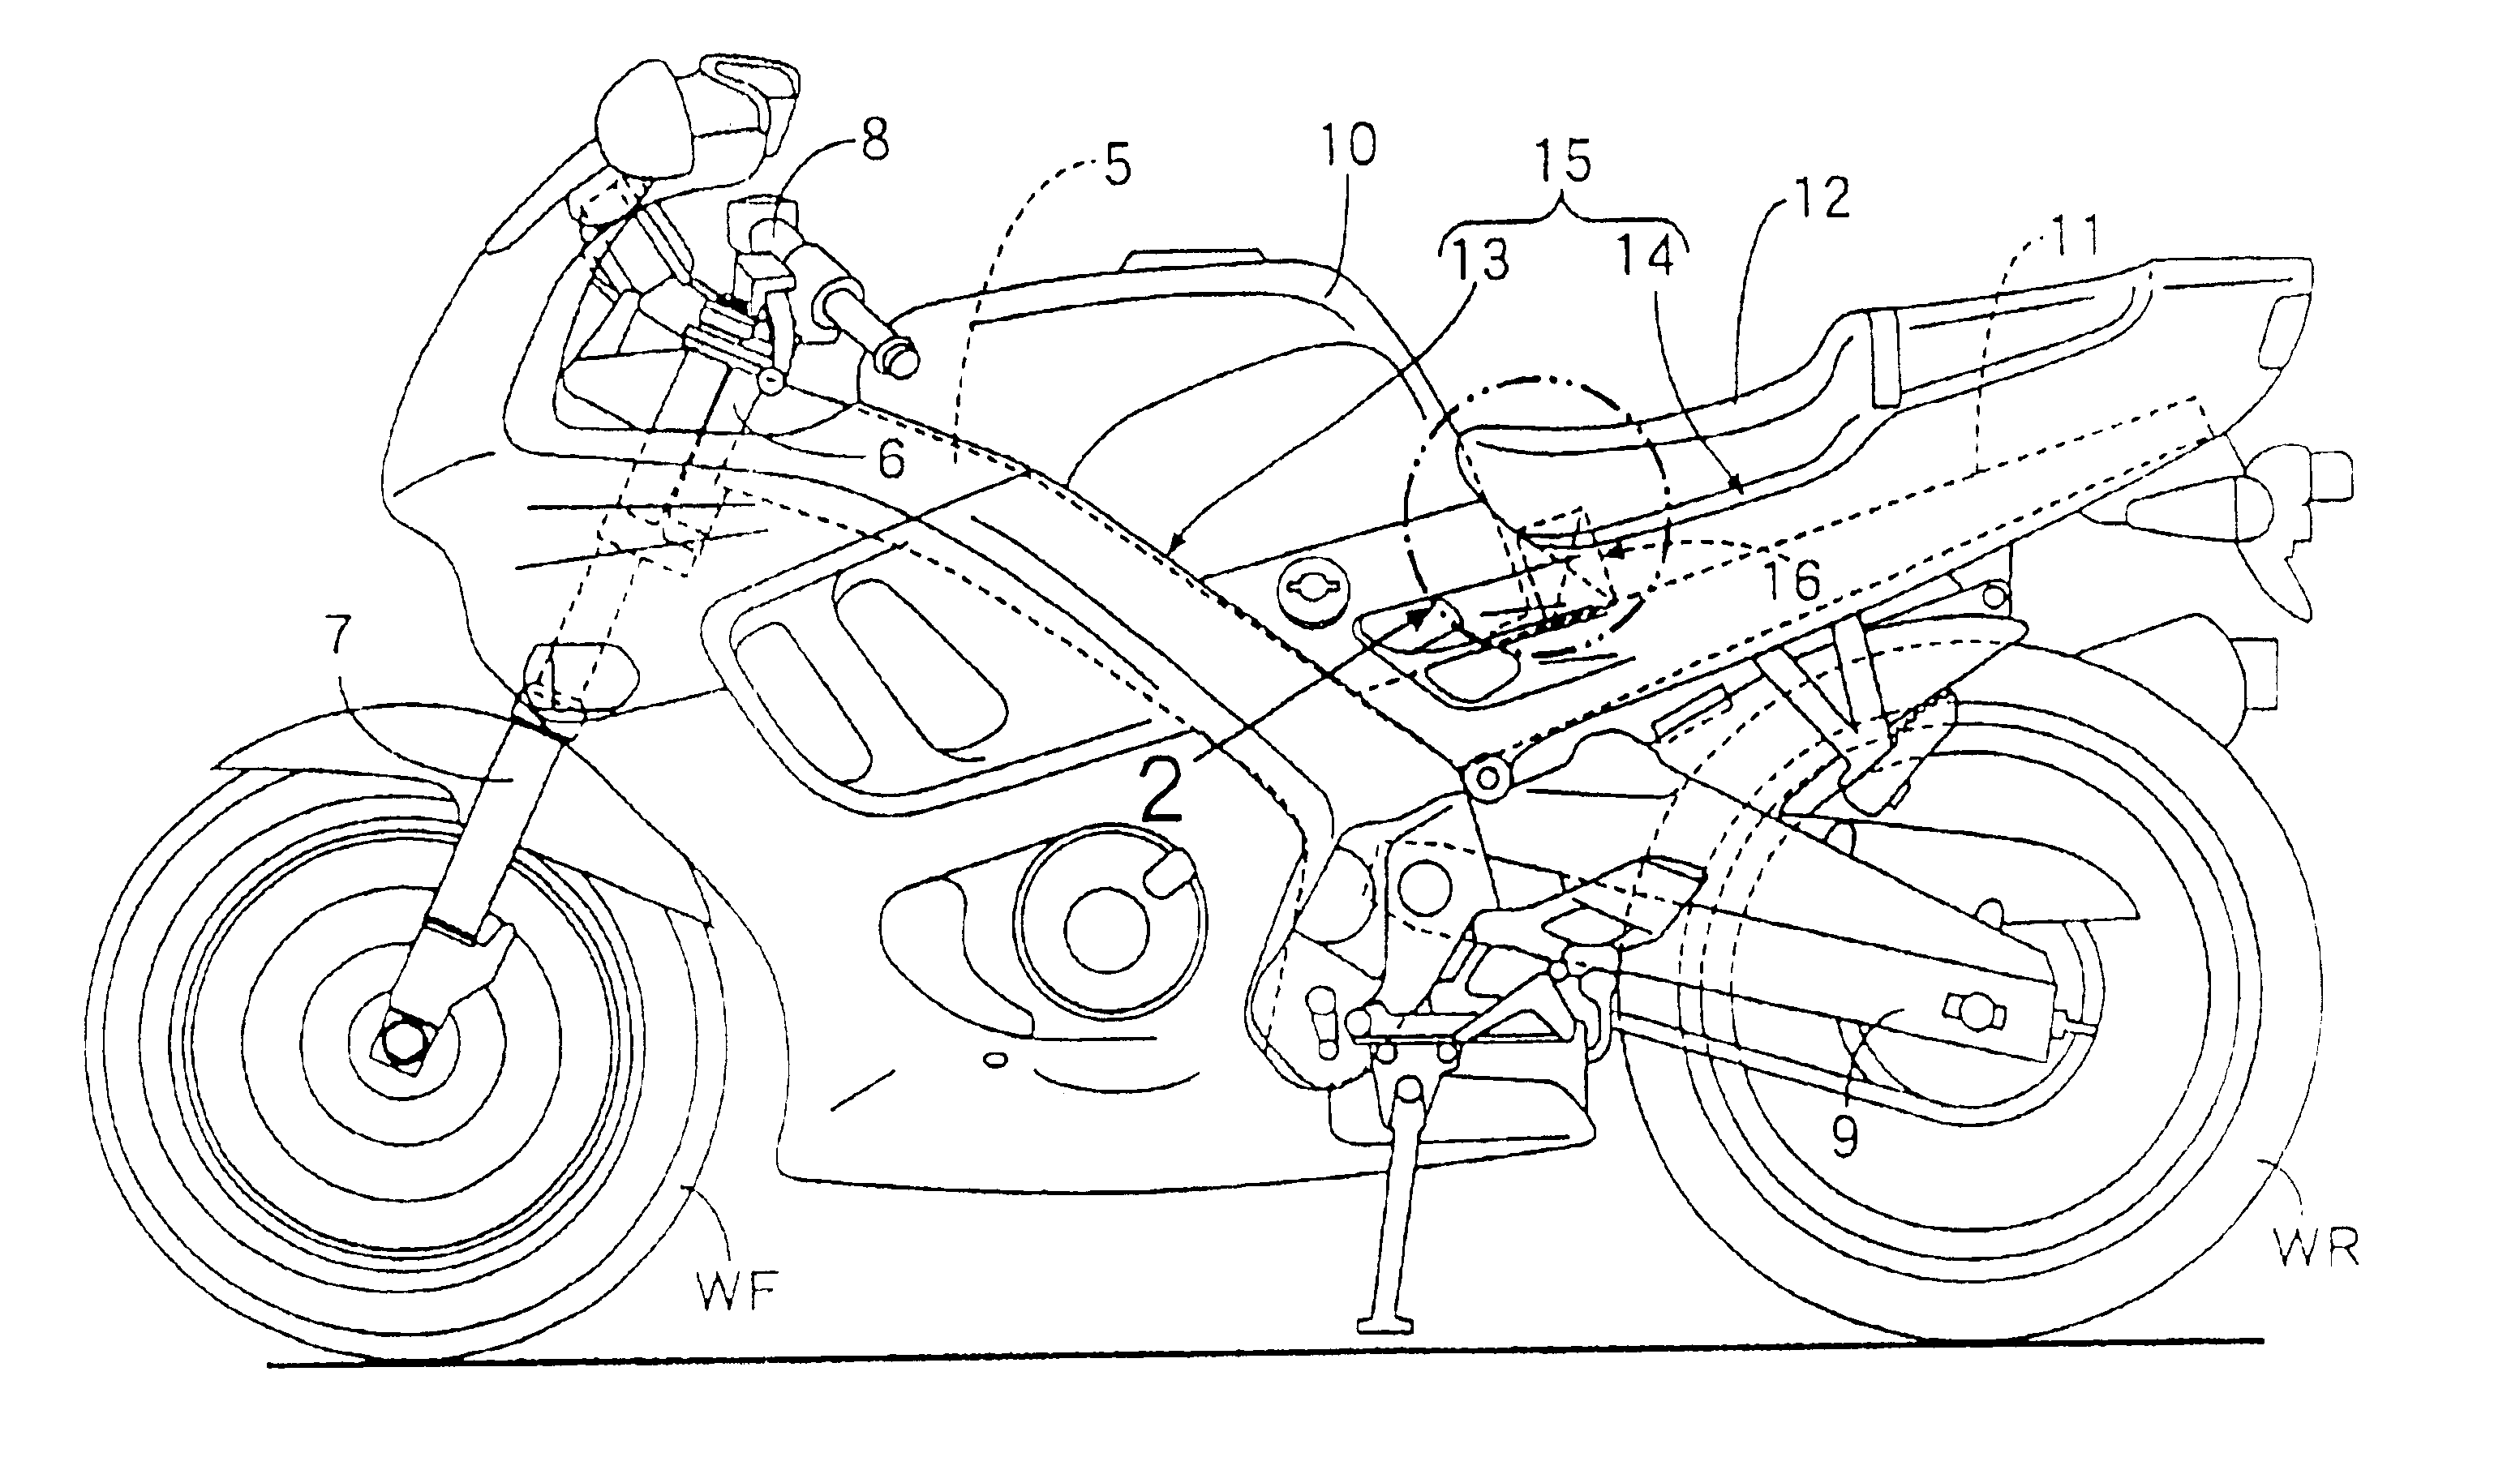 Airbag apparatus for motorcycles